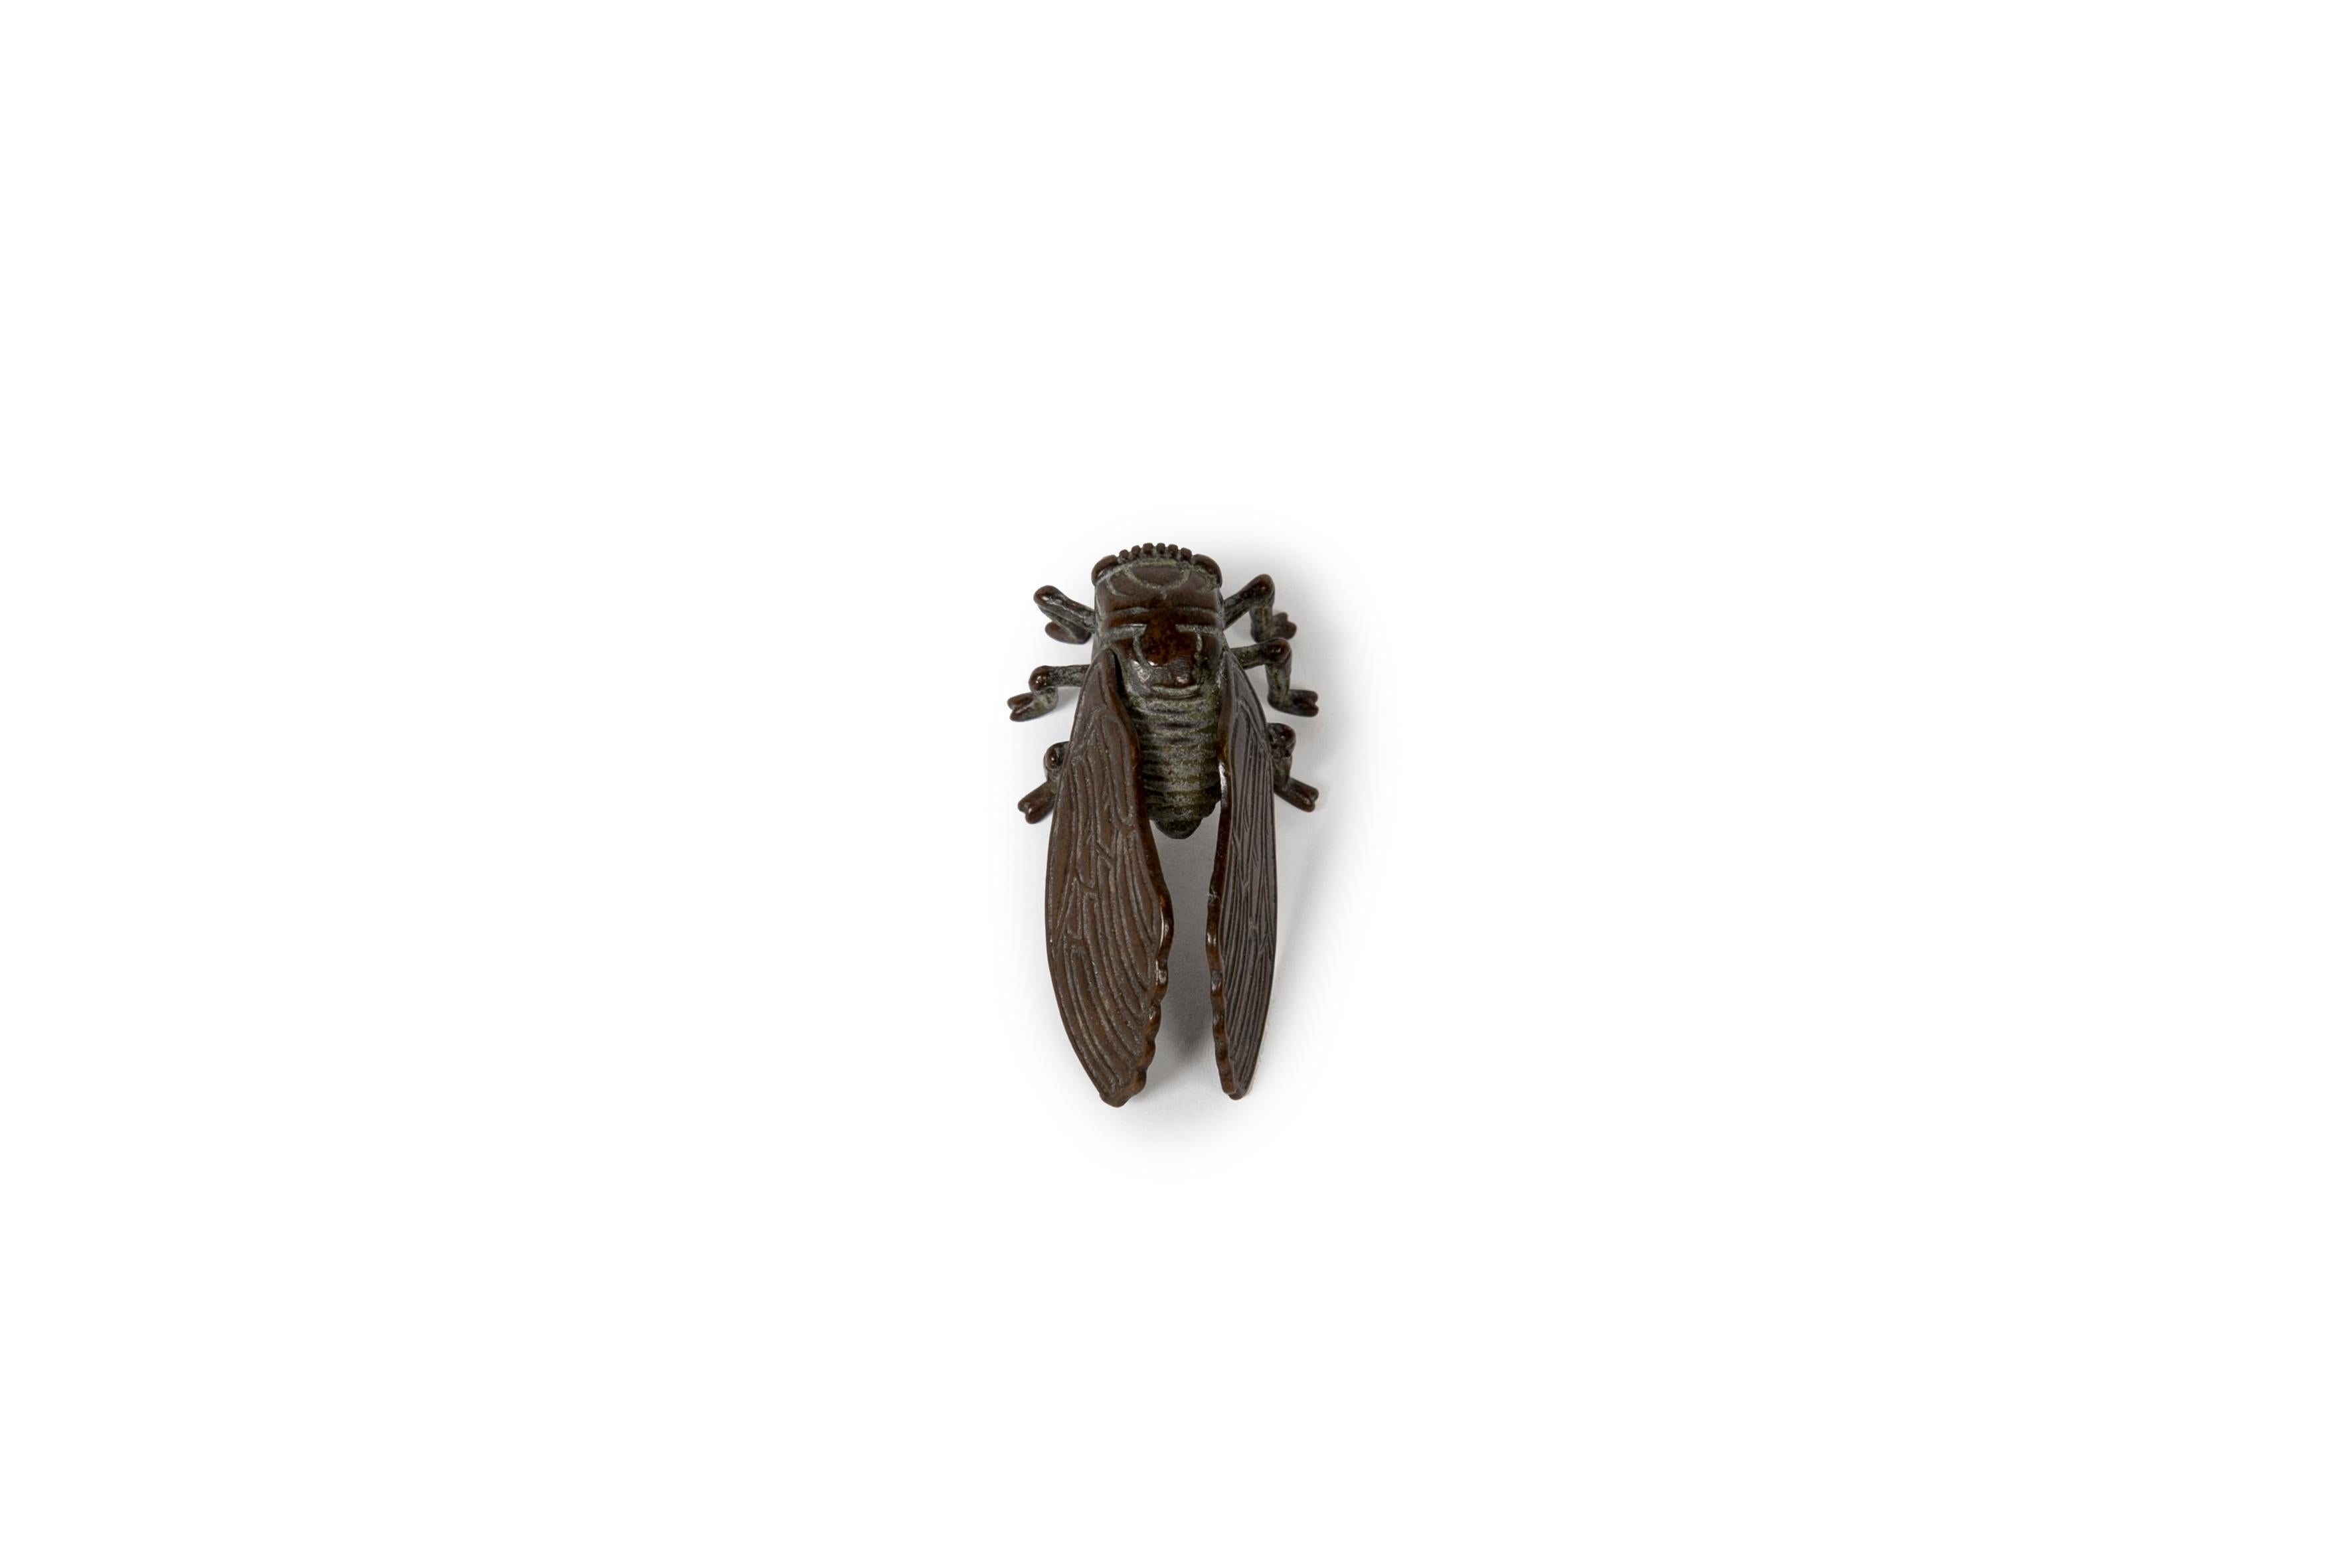 Bronze sculpture with dark brown patina of a cicada.

The cicada (in Japanese, semi) is considered as a symbol of humanity. Together with a praying mantis and a spider, they represent the three virtues of a general: humanity, courage and